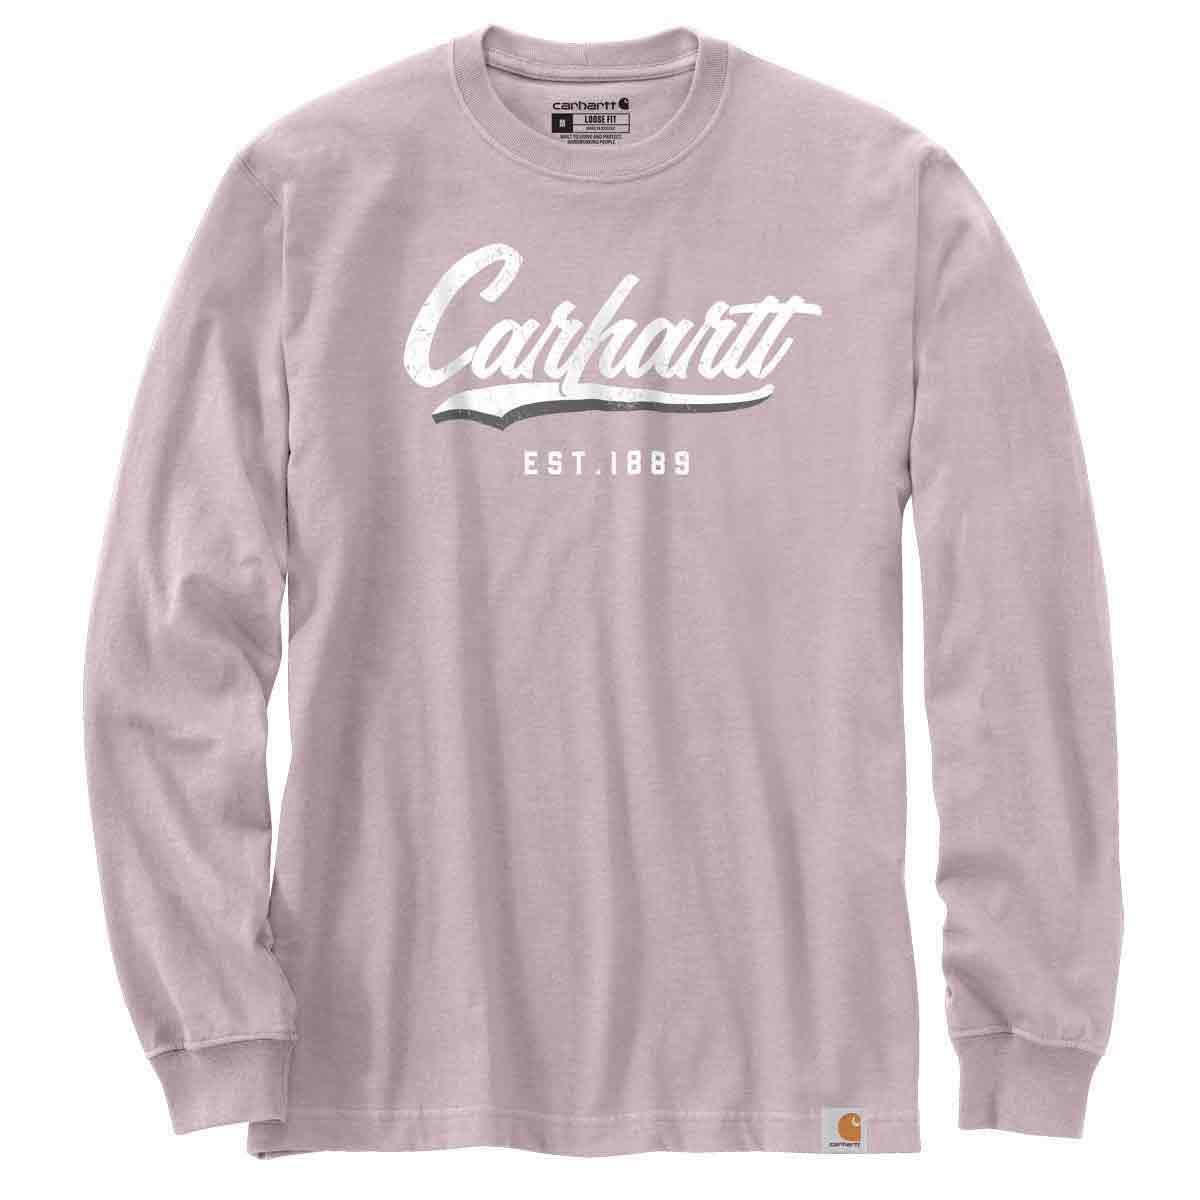 Carhartt Women's Loose Fit Heavyweight LS Hand Painted Graphic T-Shirt